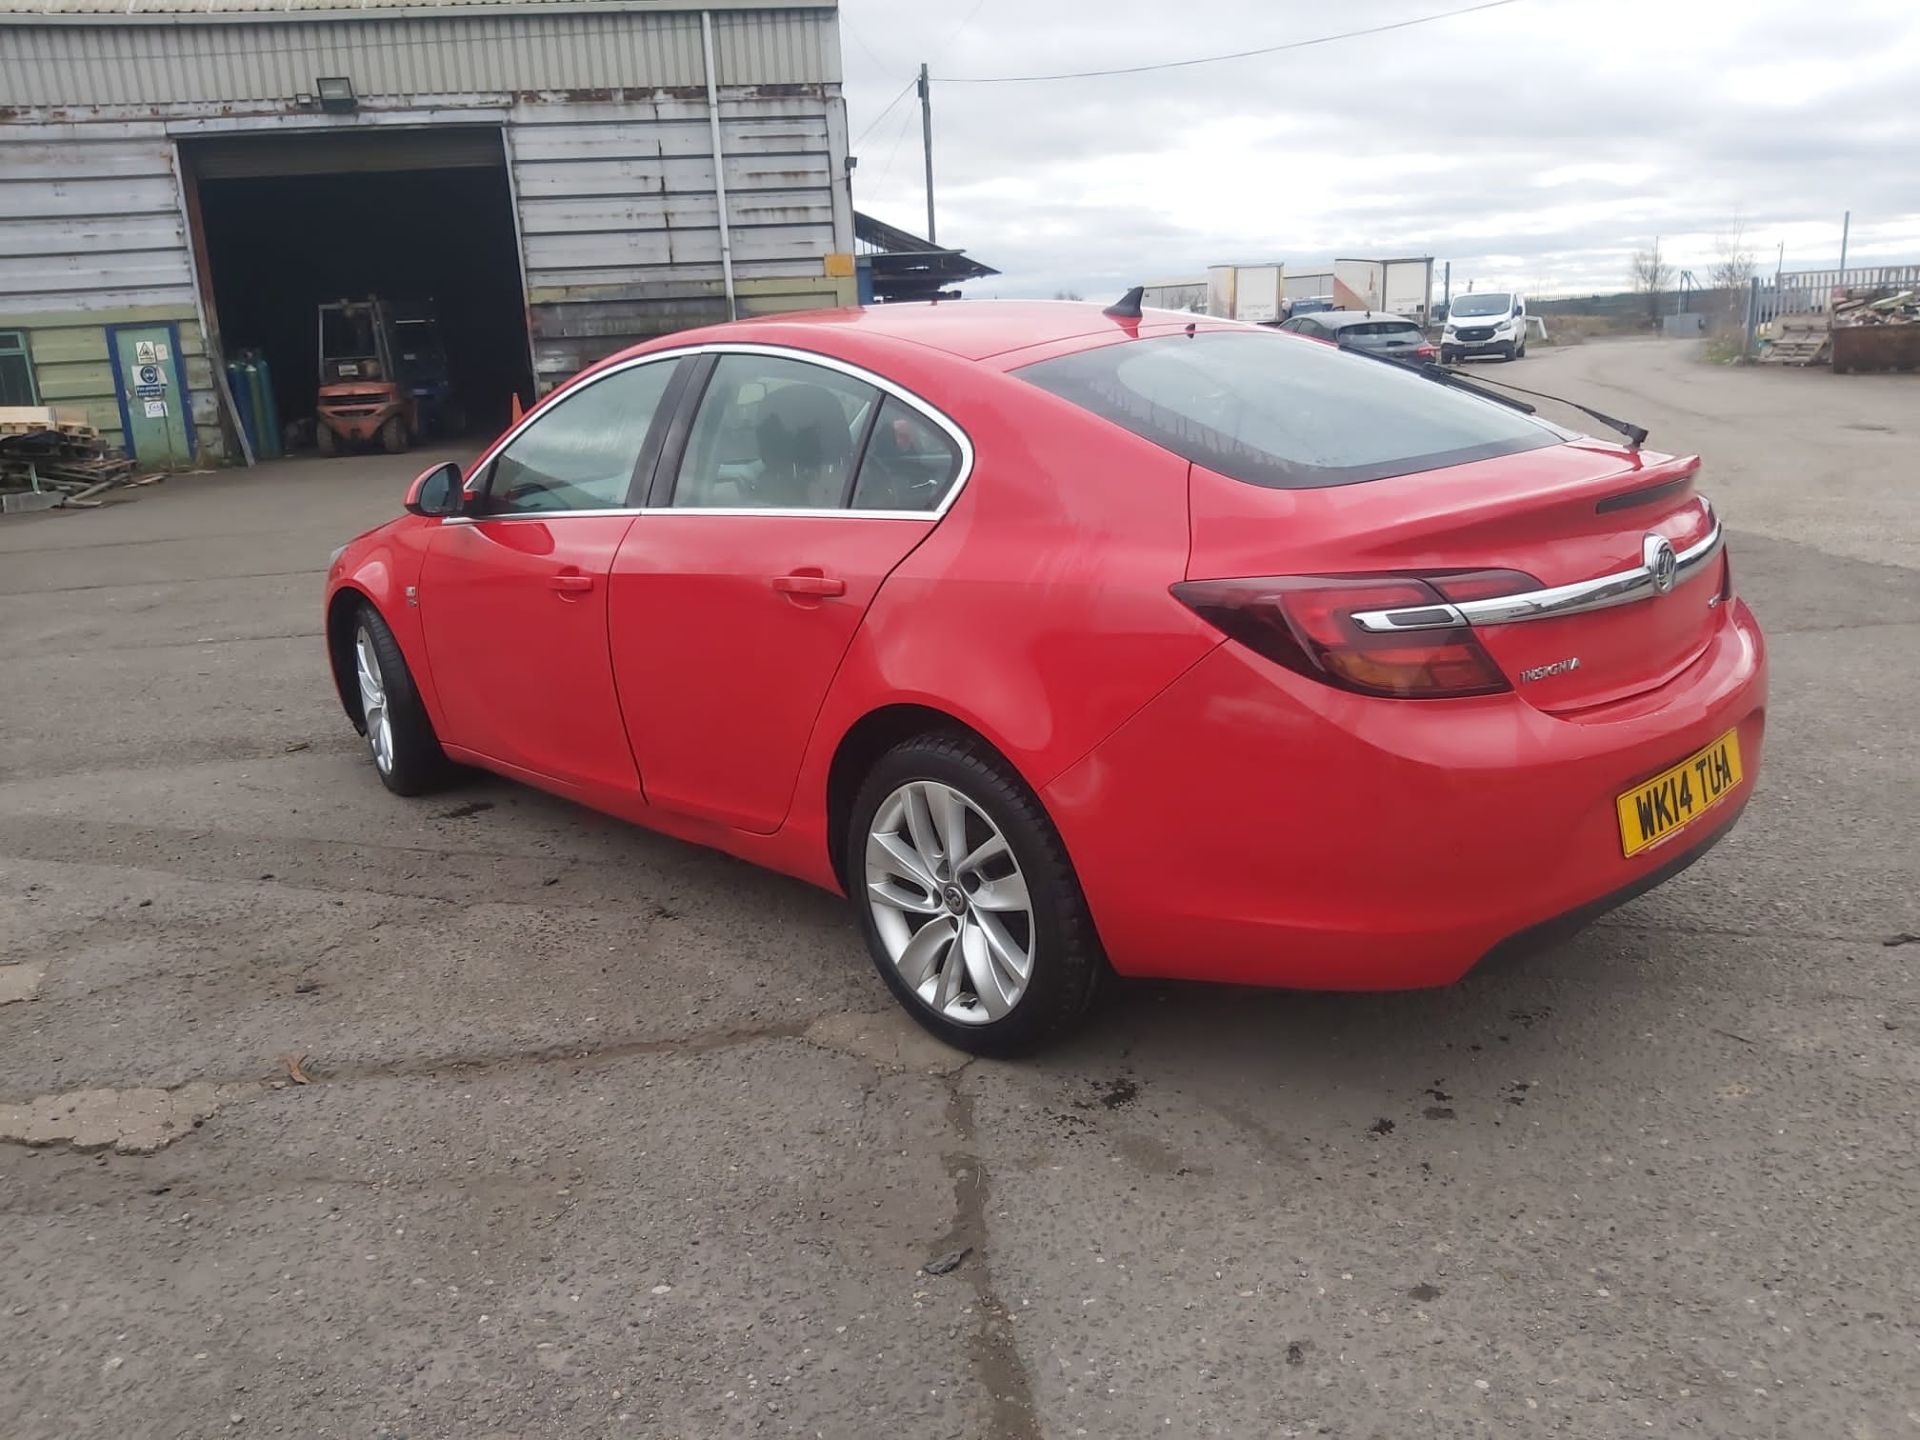 'ON SALE' 2014 VAUXHALL INSIGNIA ELITE NAV CDTI AUTOMATIC RED *NO VAT* - Image 3 of 22